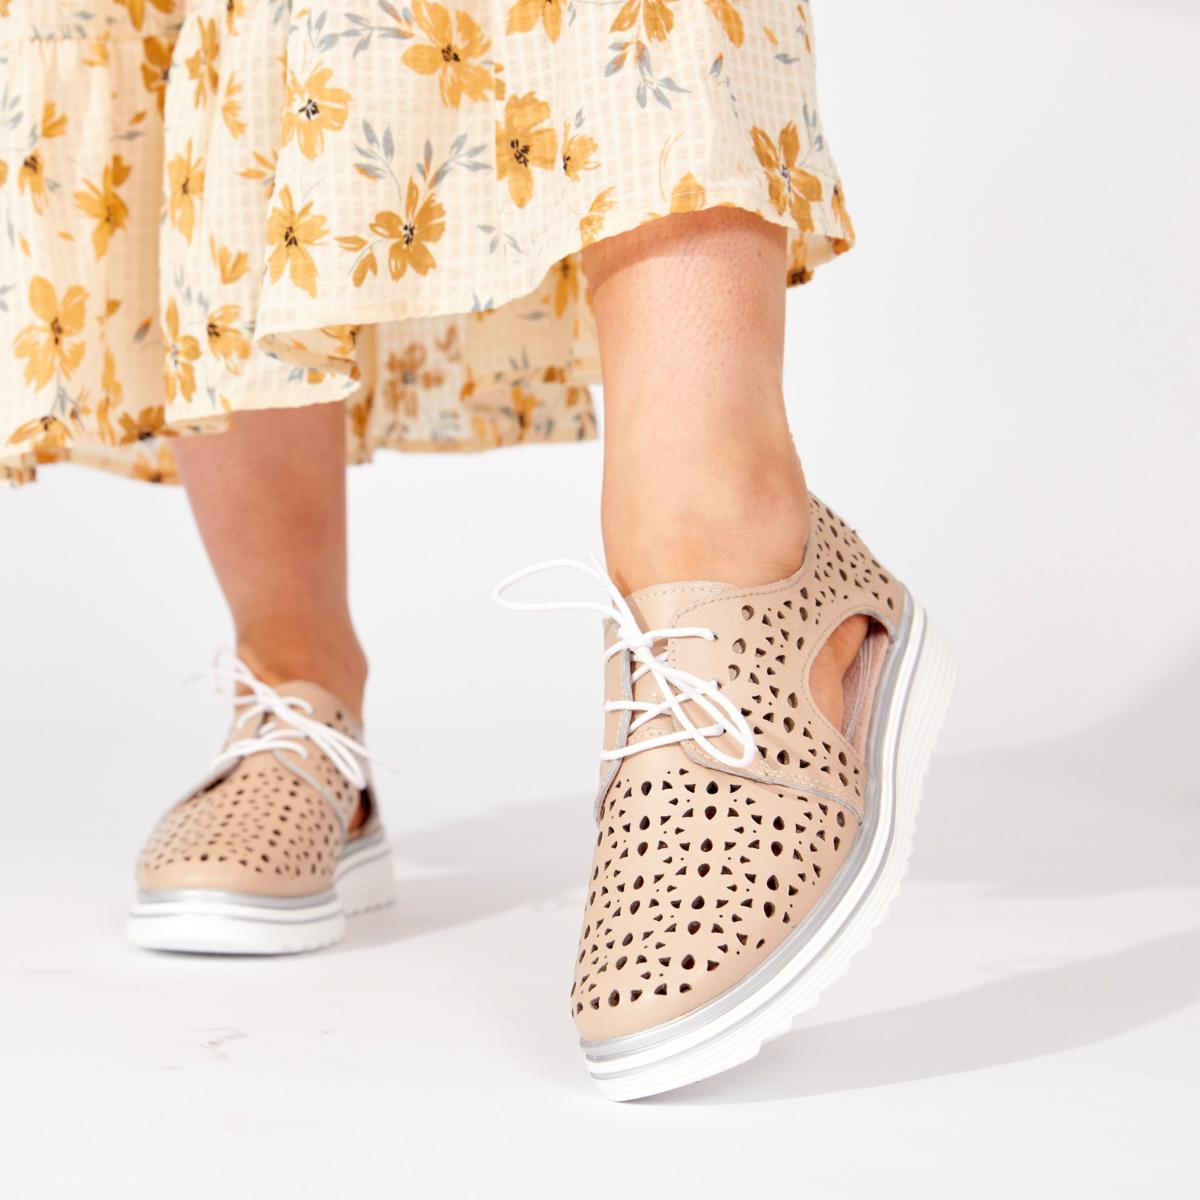 summer collection, just bee comfort, shoes, footwear, summer shoes, ladies footwear, best shoes, australian style, leather shoes, comfort shoes, flats, summer flats